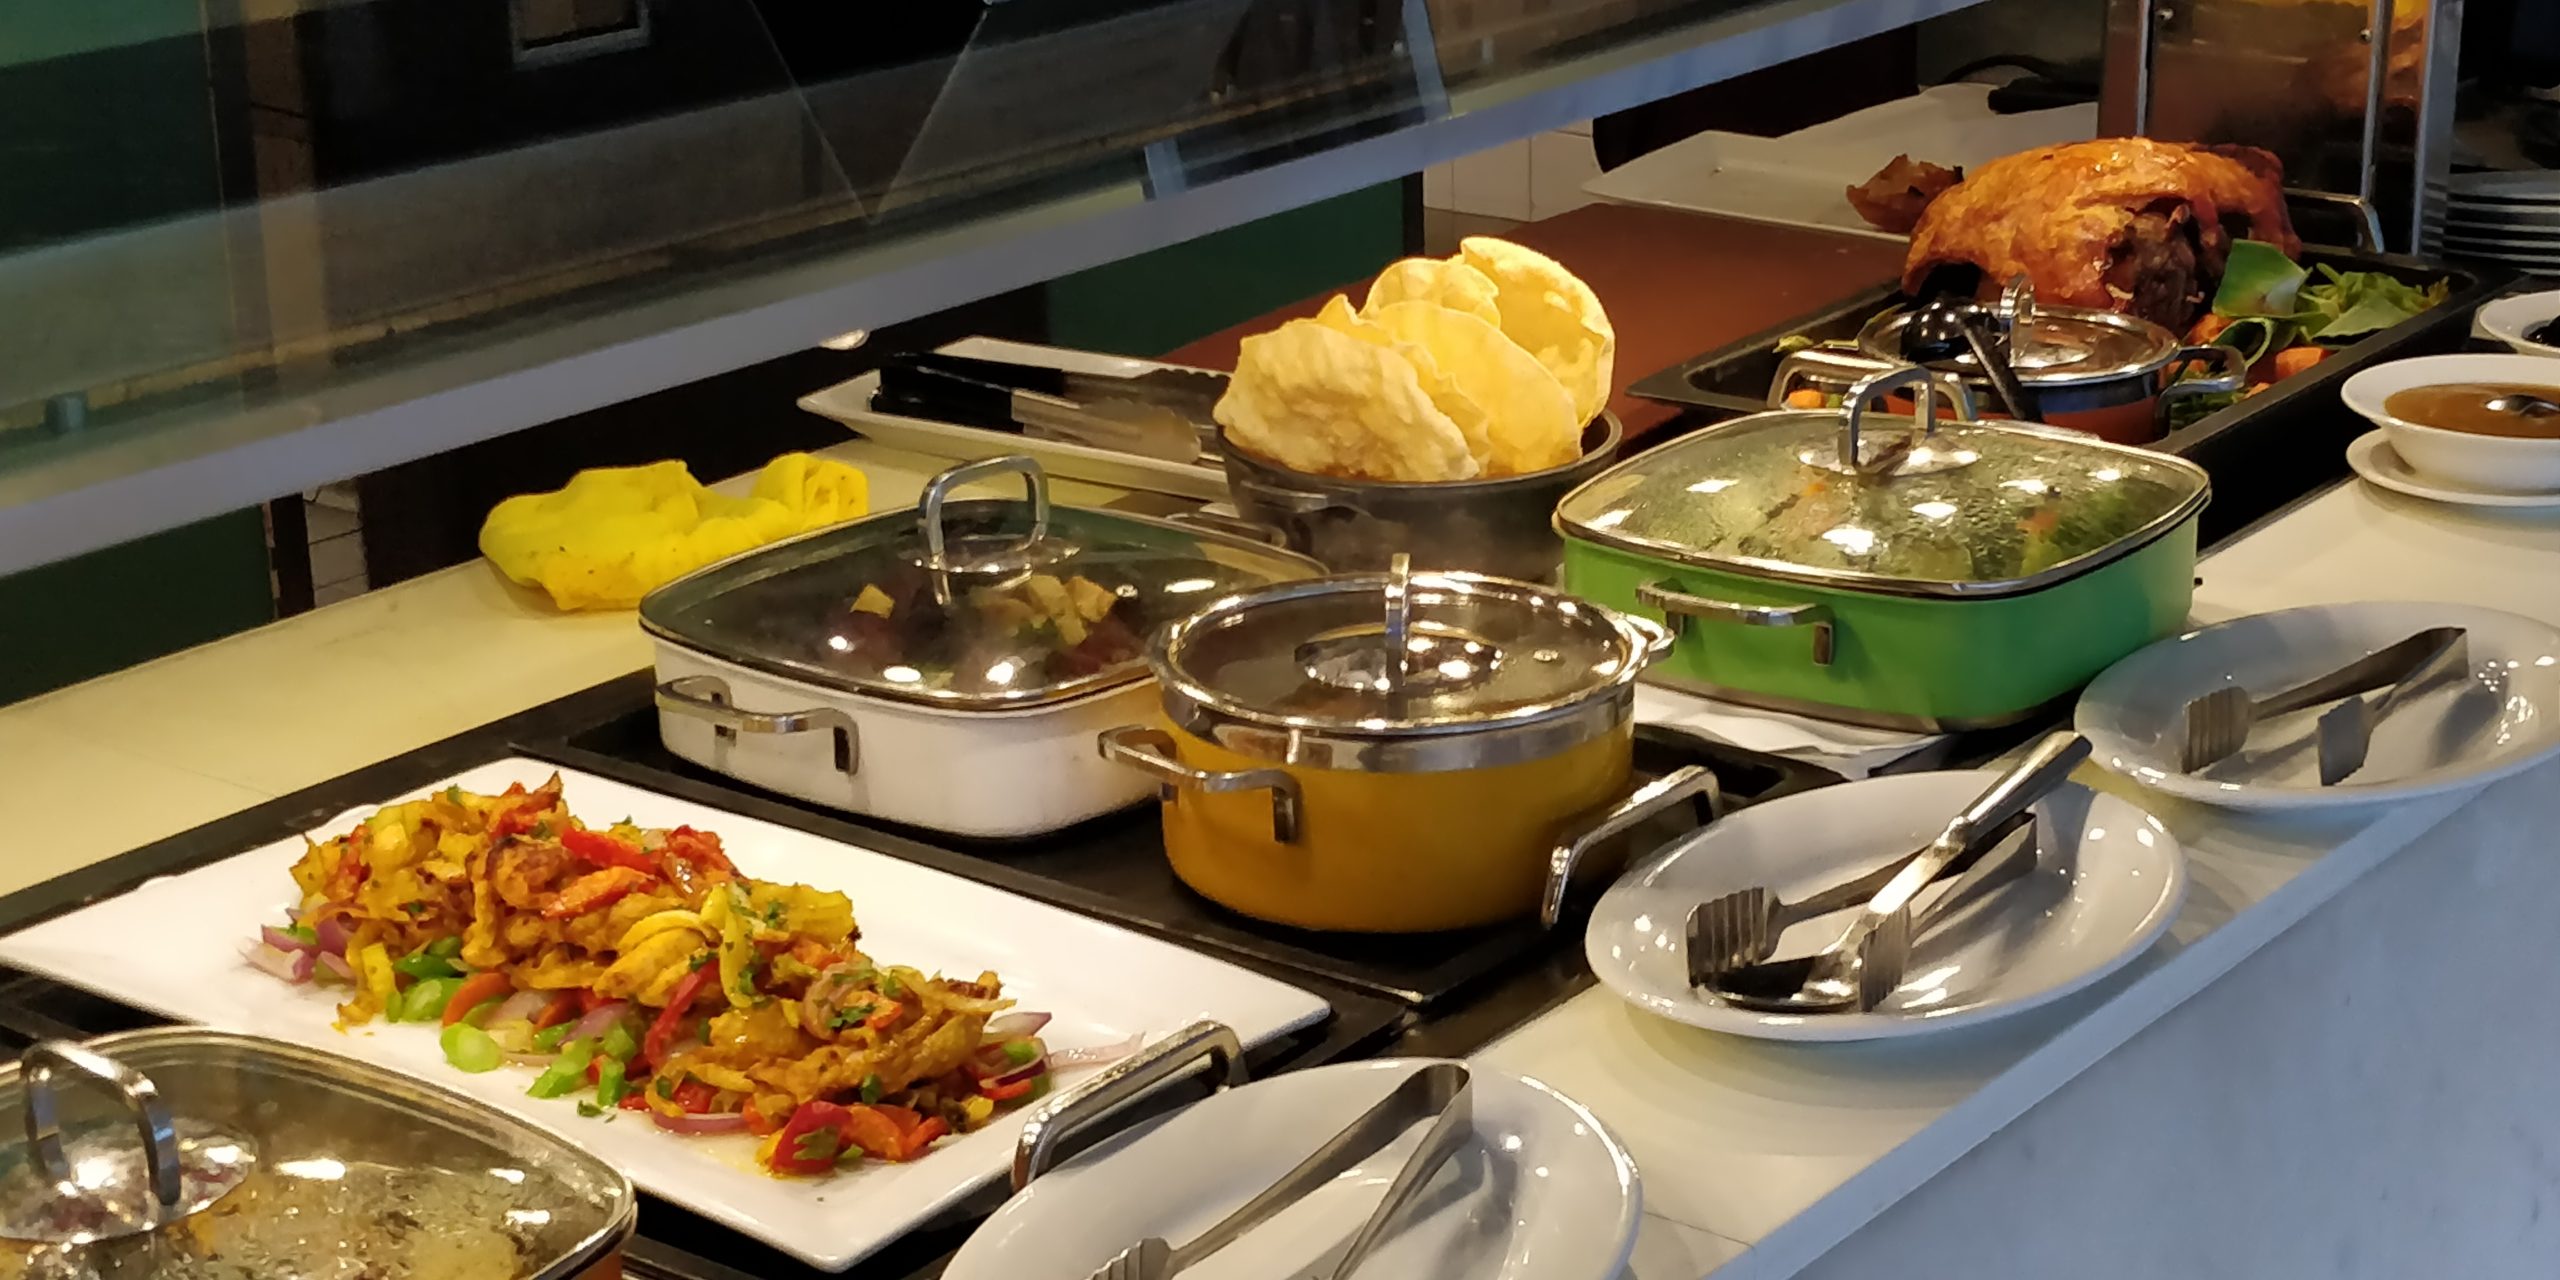 Review the Grand Mirage Resort picture of the hot meats and dishes for the evening buffet